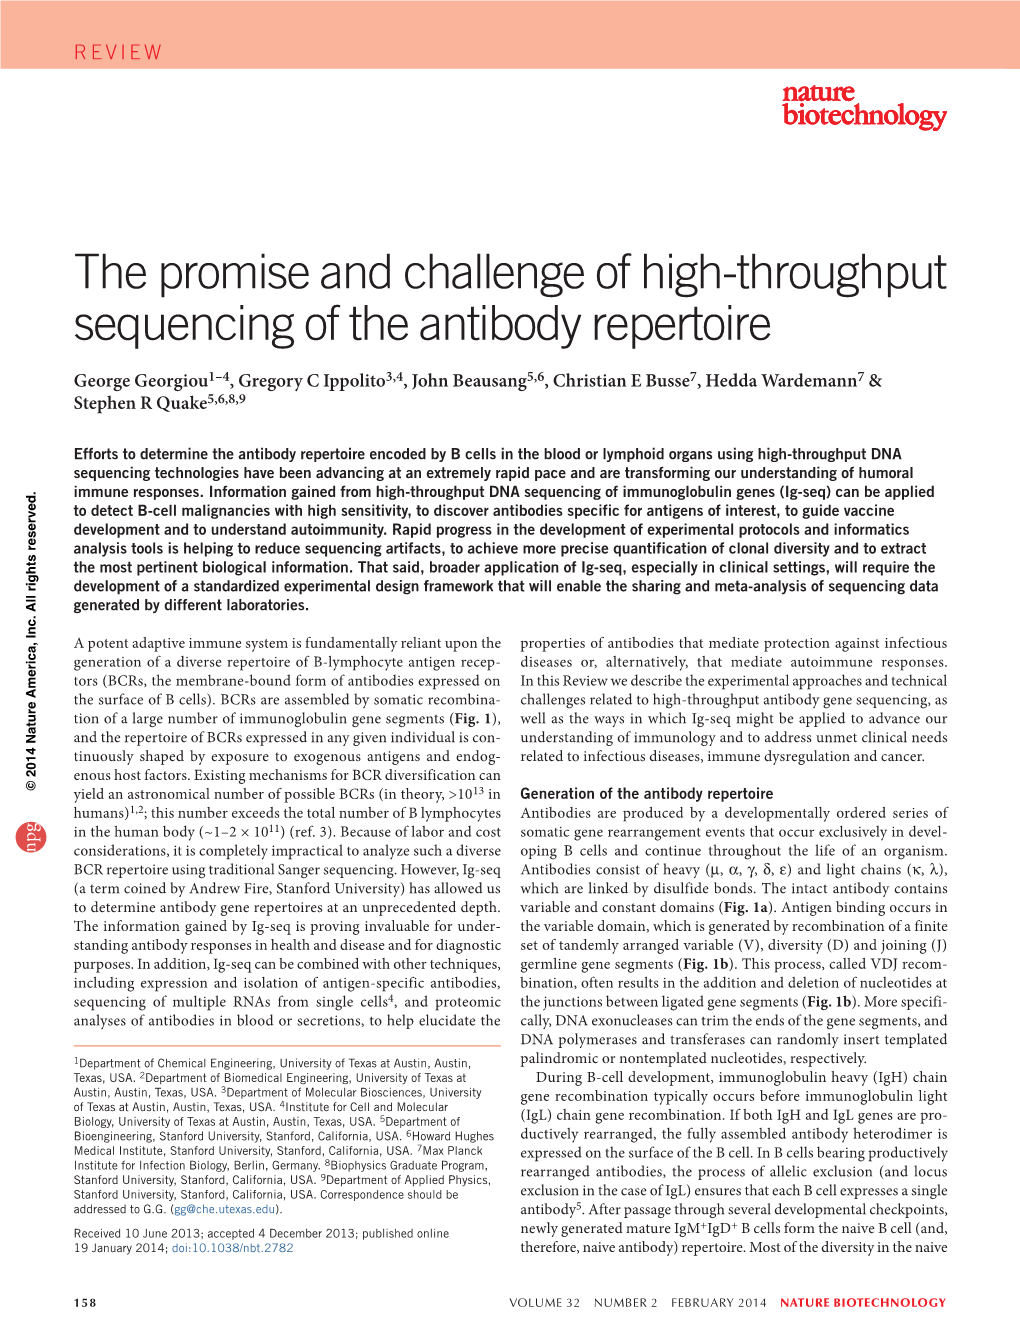 The Promise and Challenge of High-Throughput Sequencing of the Antibody Repertoire